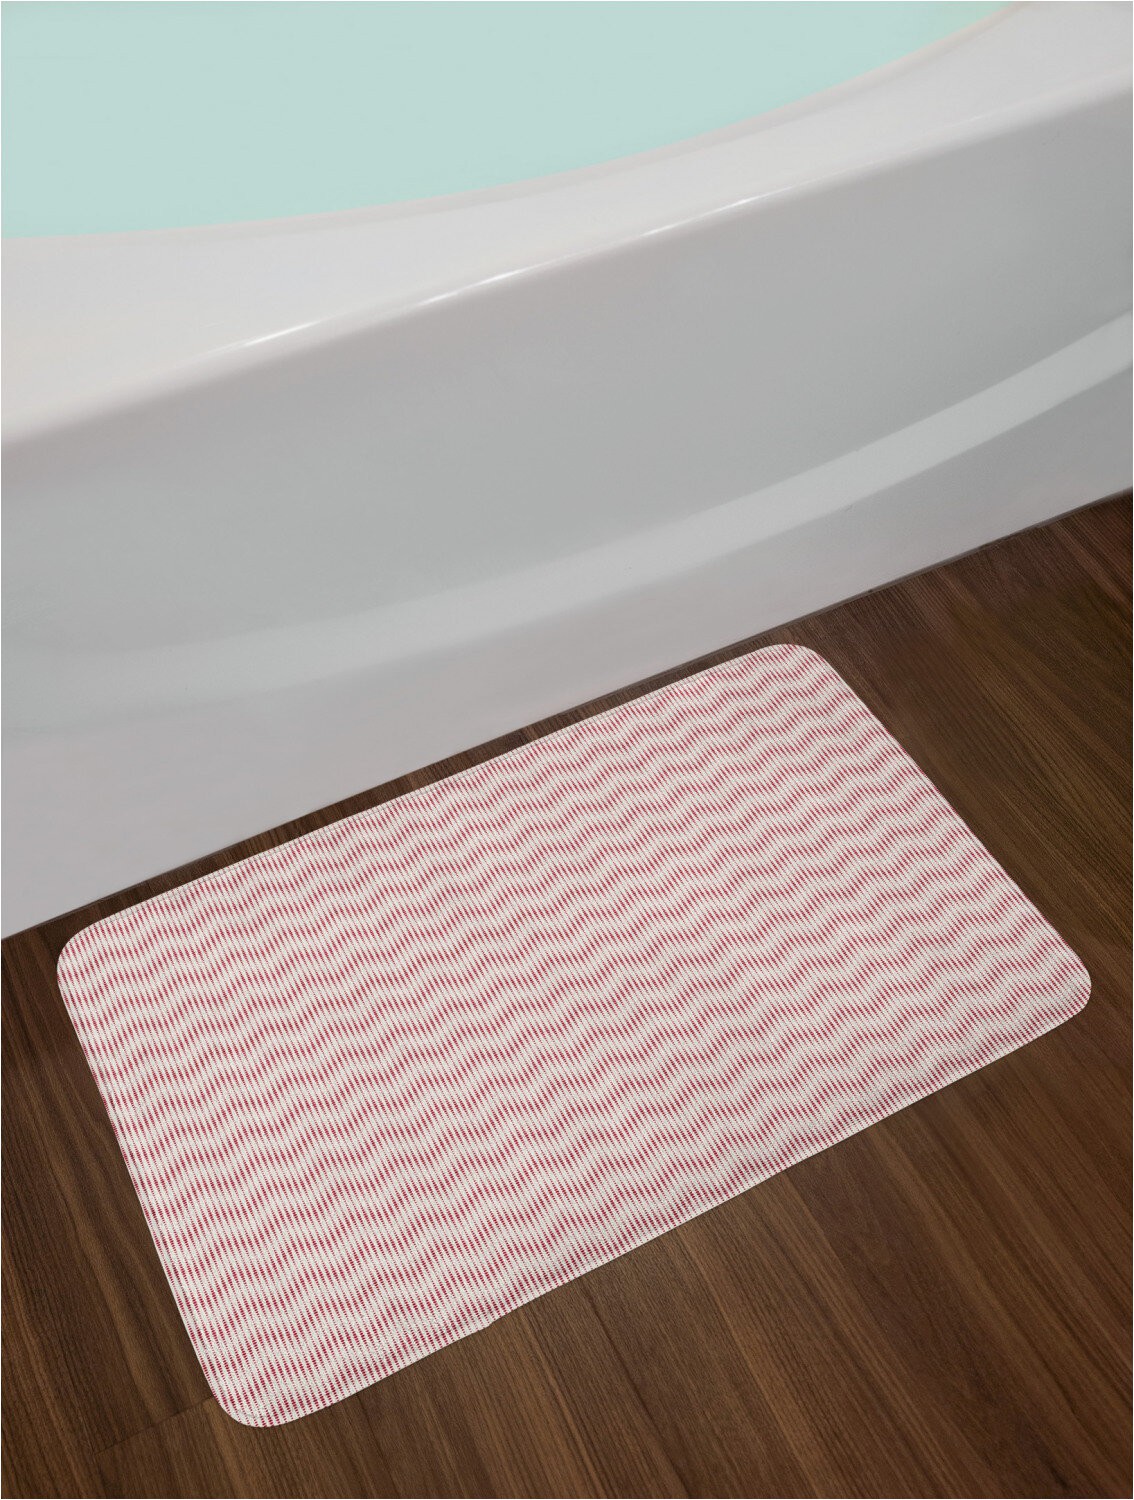 Plush Pink Bathroom Rugs Vertical Lines From Halftone Spots Bath Rug